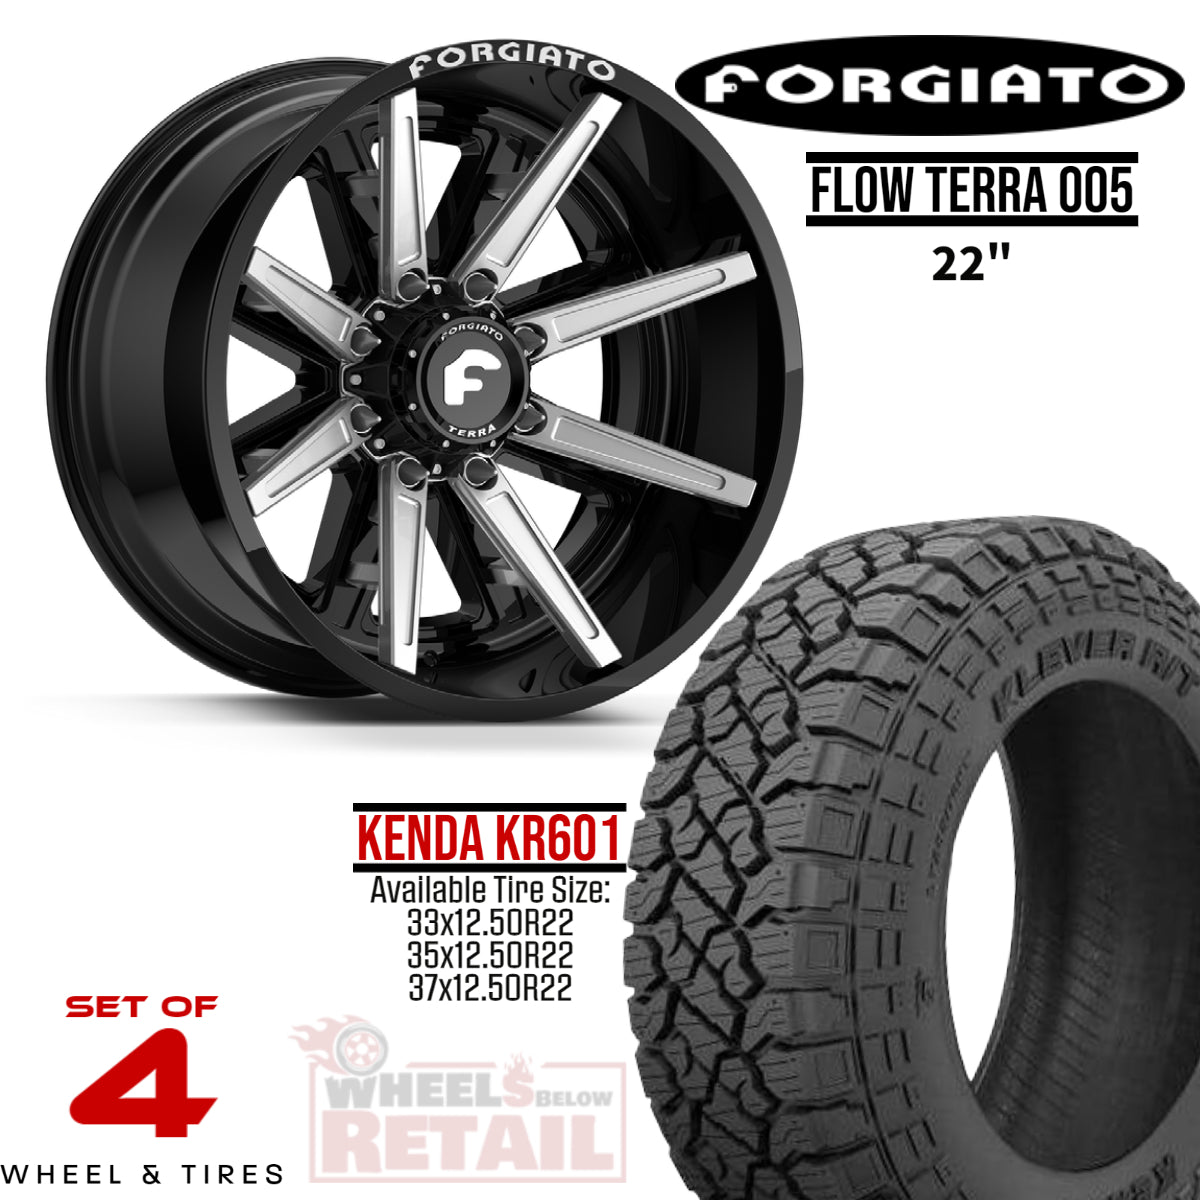 FORGIATO FLOW TERRA 005 22-INCH PACKAGE FOR FORD F150